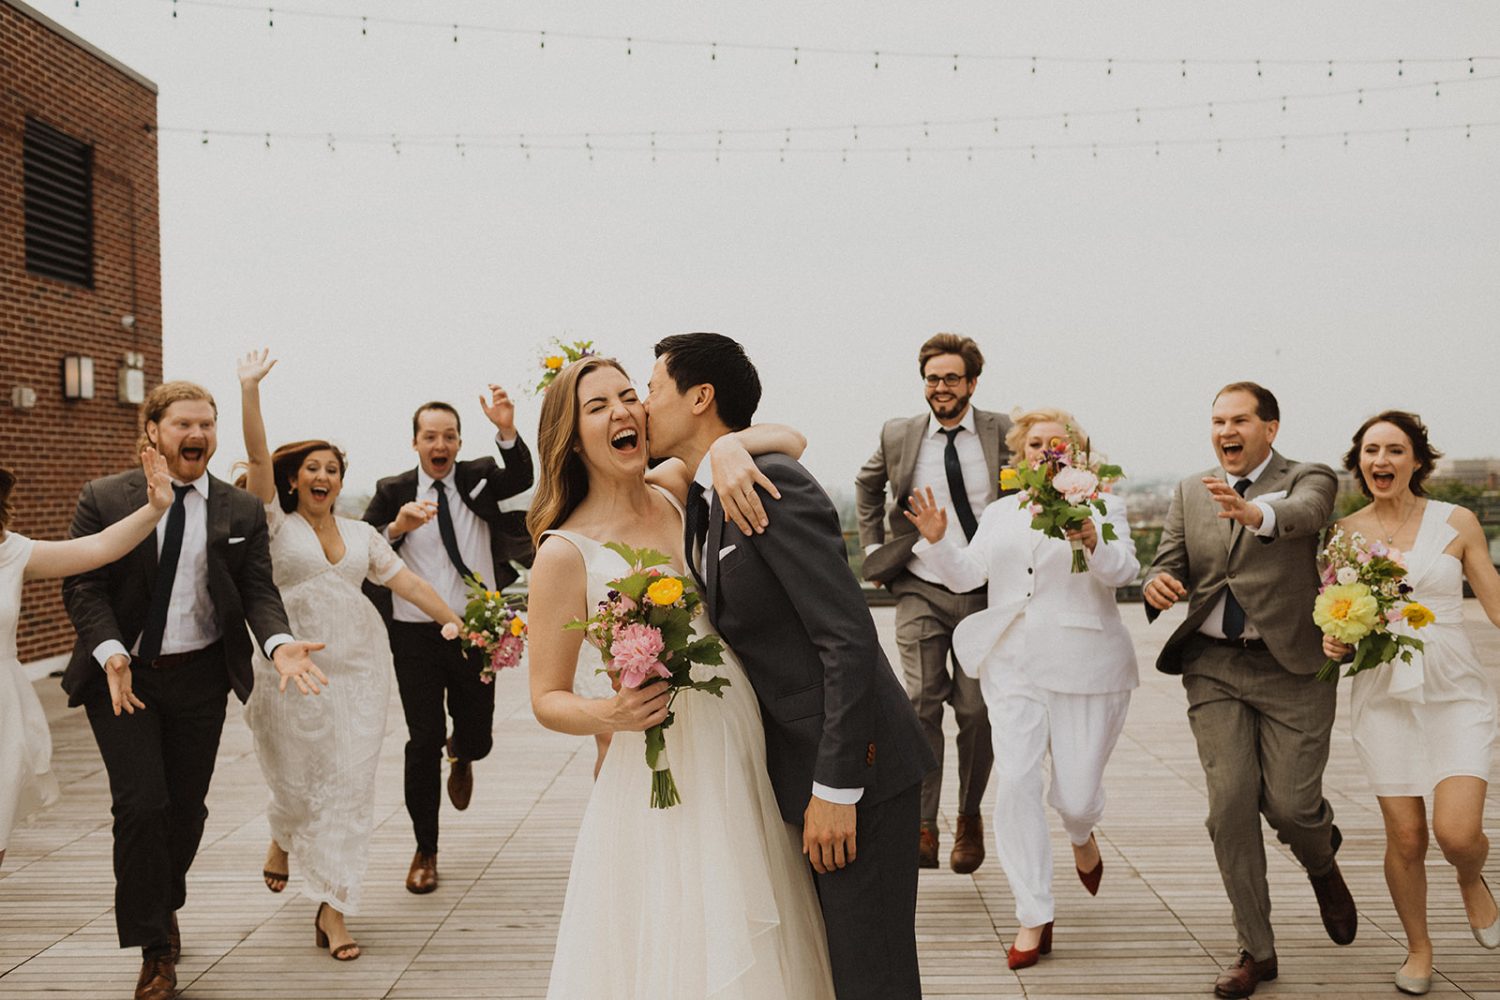 Groom kisses bride on cheek with wedding party chasing them